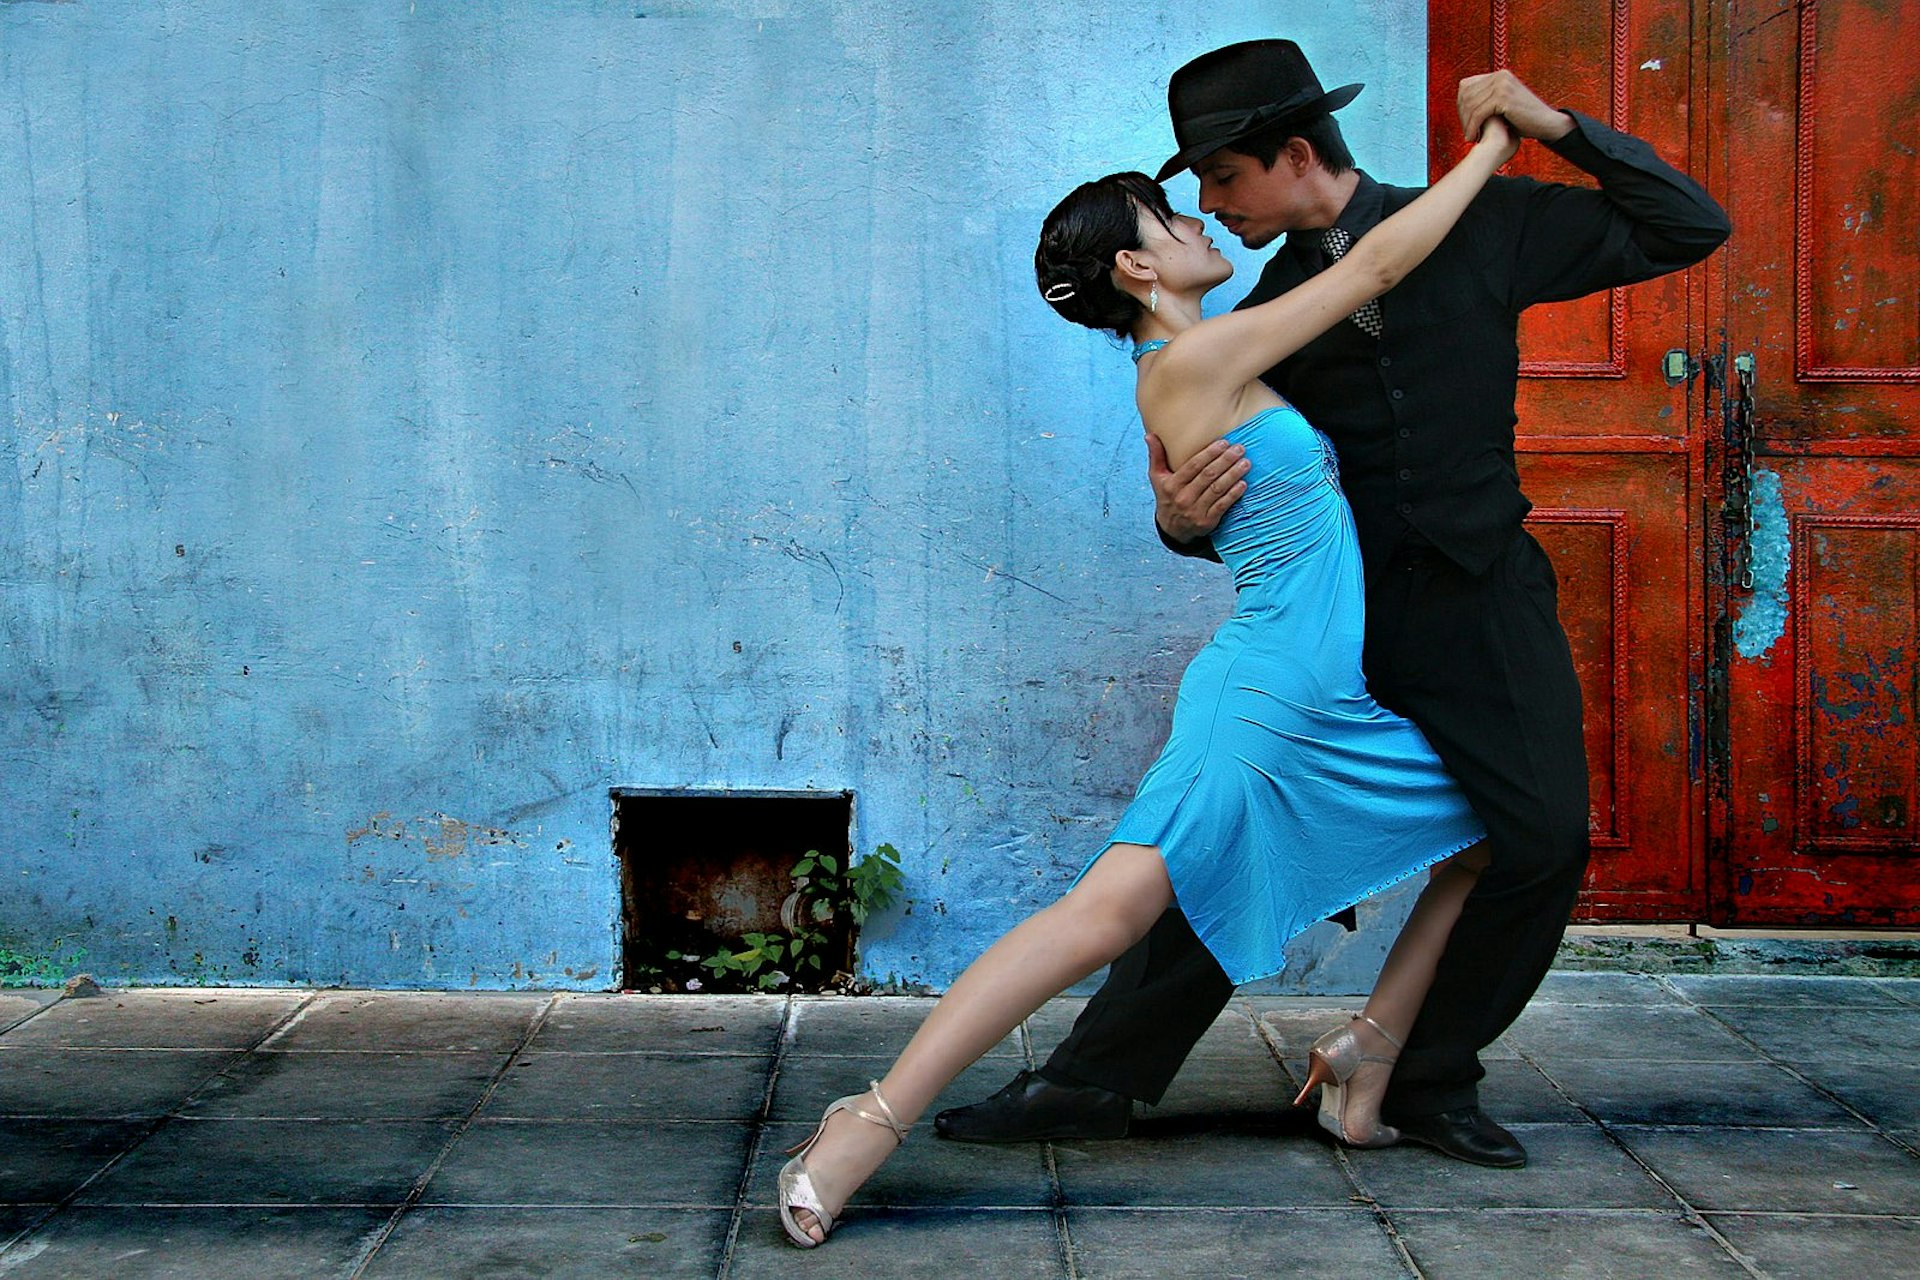 Tango is one of the quintessential arts of Buenos Aires; we see two dancers in the La Boca area of the city; the man is dressed in black trousers, shirt and hat with a black and white spotted tie; the lady wears a blue dress which matches the blue wall behind them.